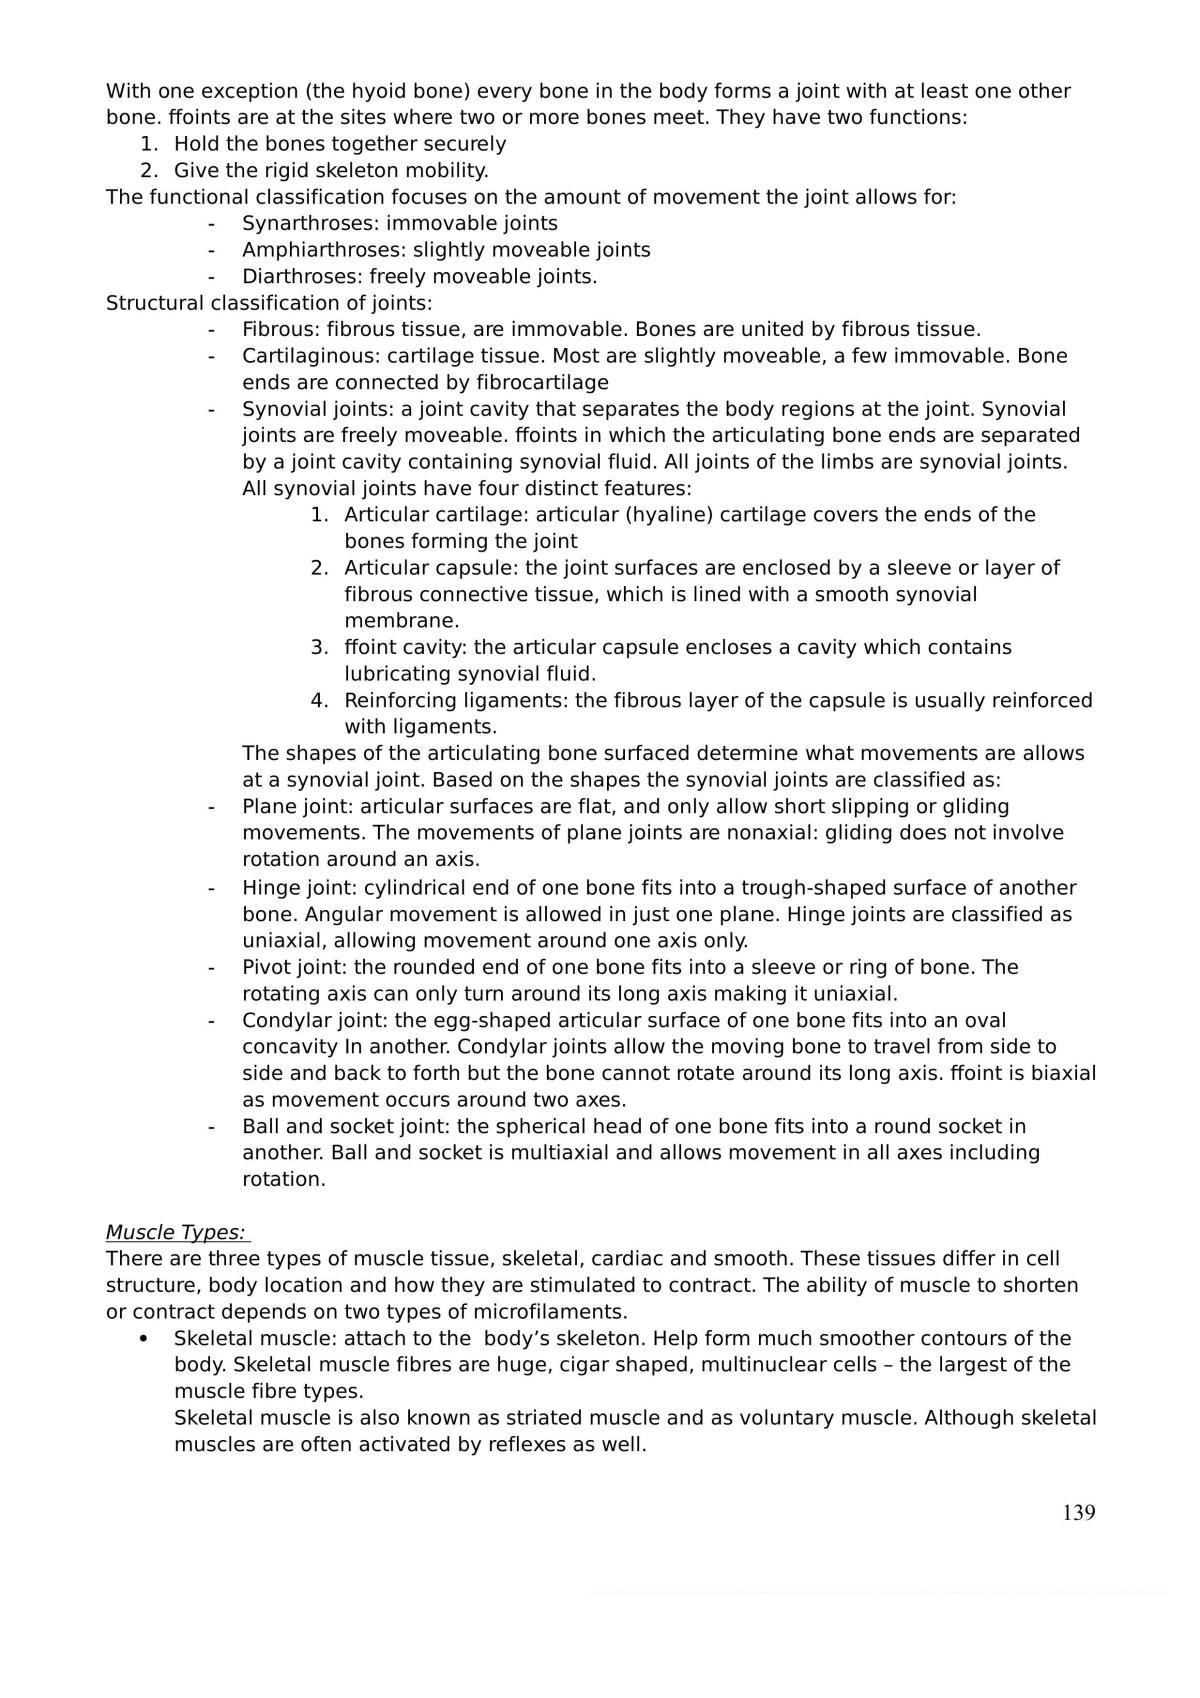 Complete Study Notes - Page 139